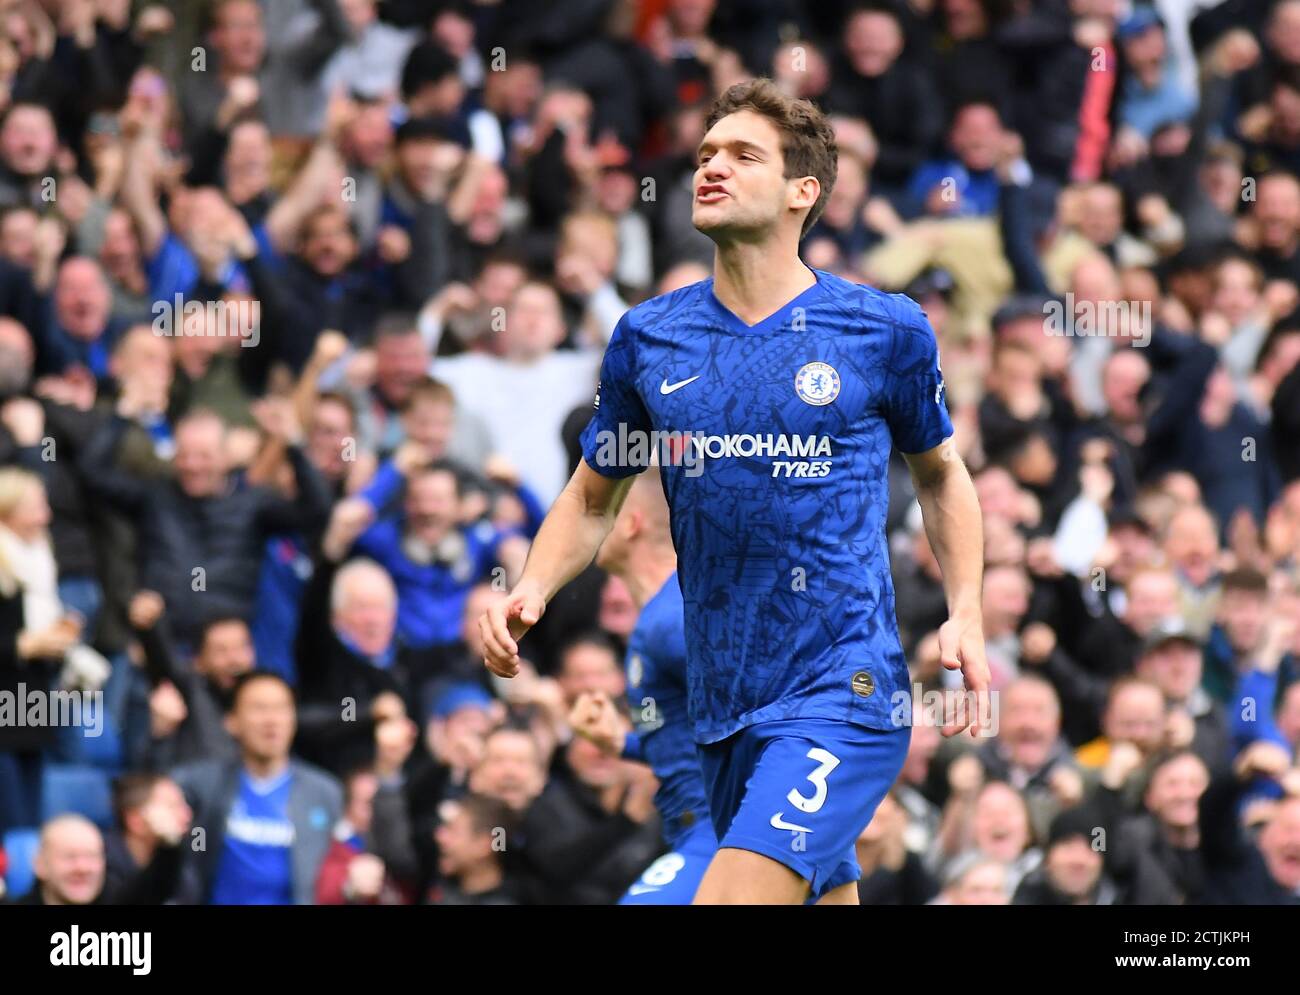 LONDON, ENGLAND - FEBRUARY 22, 2020: Marcos Alonso of Chelsea celebrates after he scored a goal during the 2019/20 Premier League game between Chelsea FC and Tottenham Hotspur FC at Stamford Bridge. Stock Photo